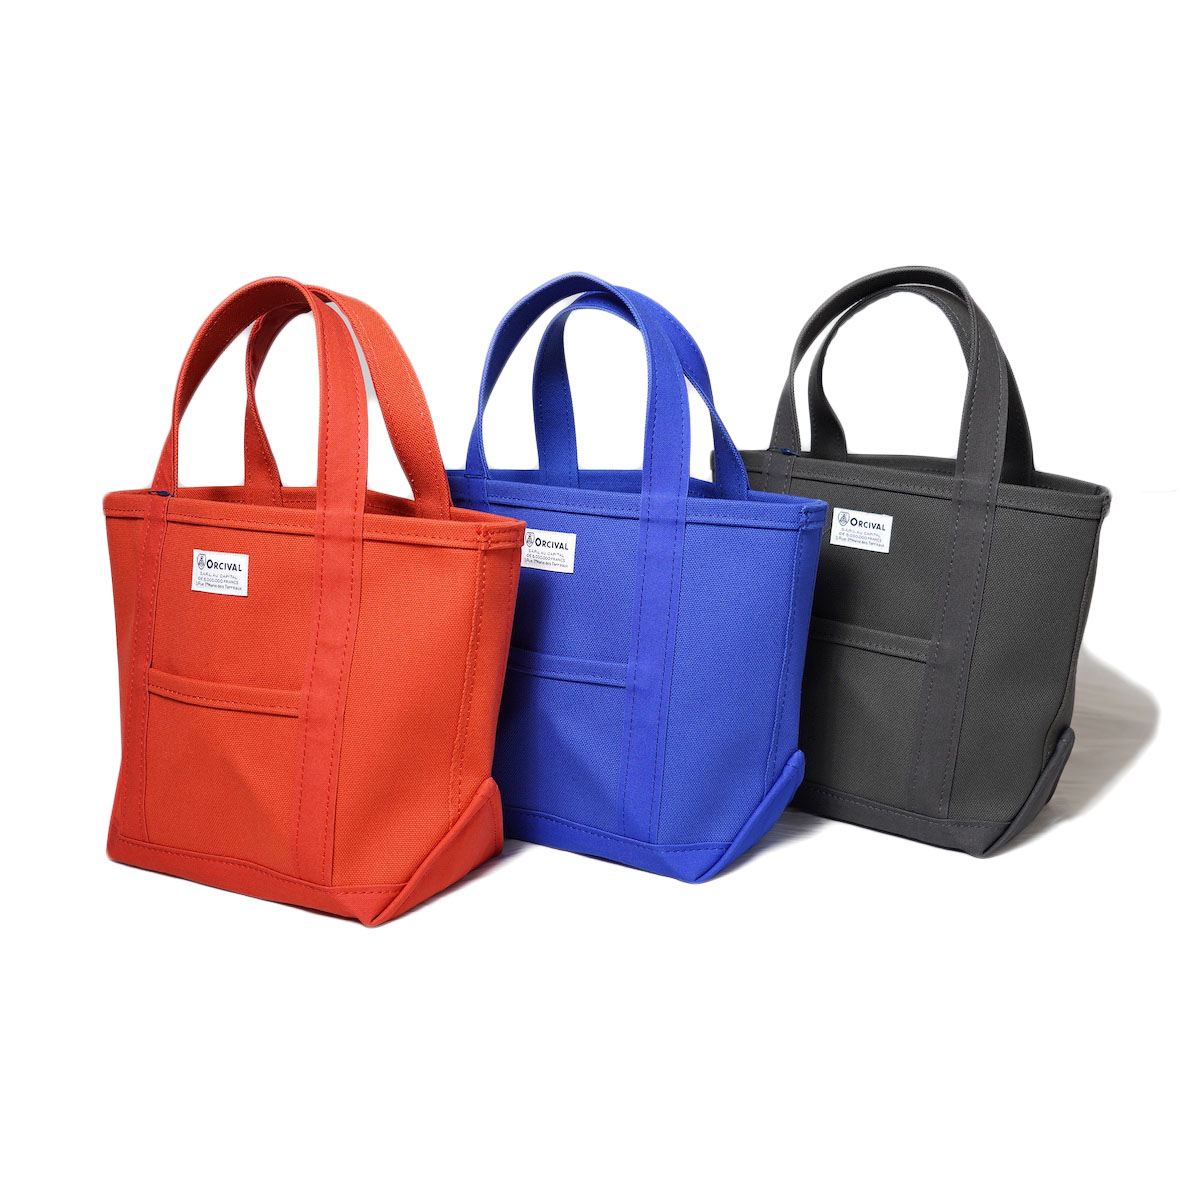 ORCIVAL / Hanp Tote Bag Small (One Color)